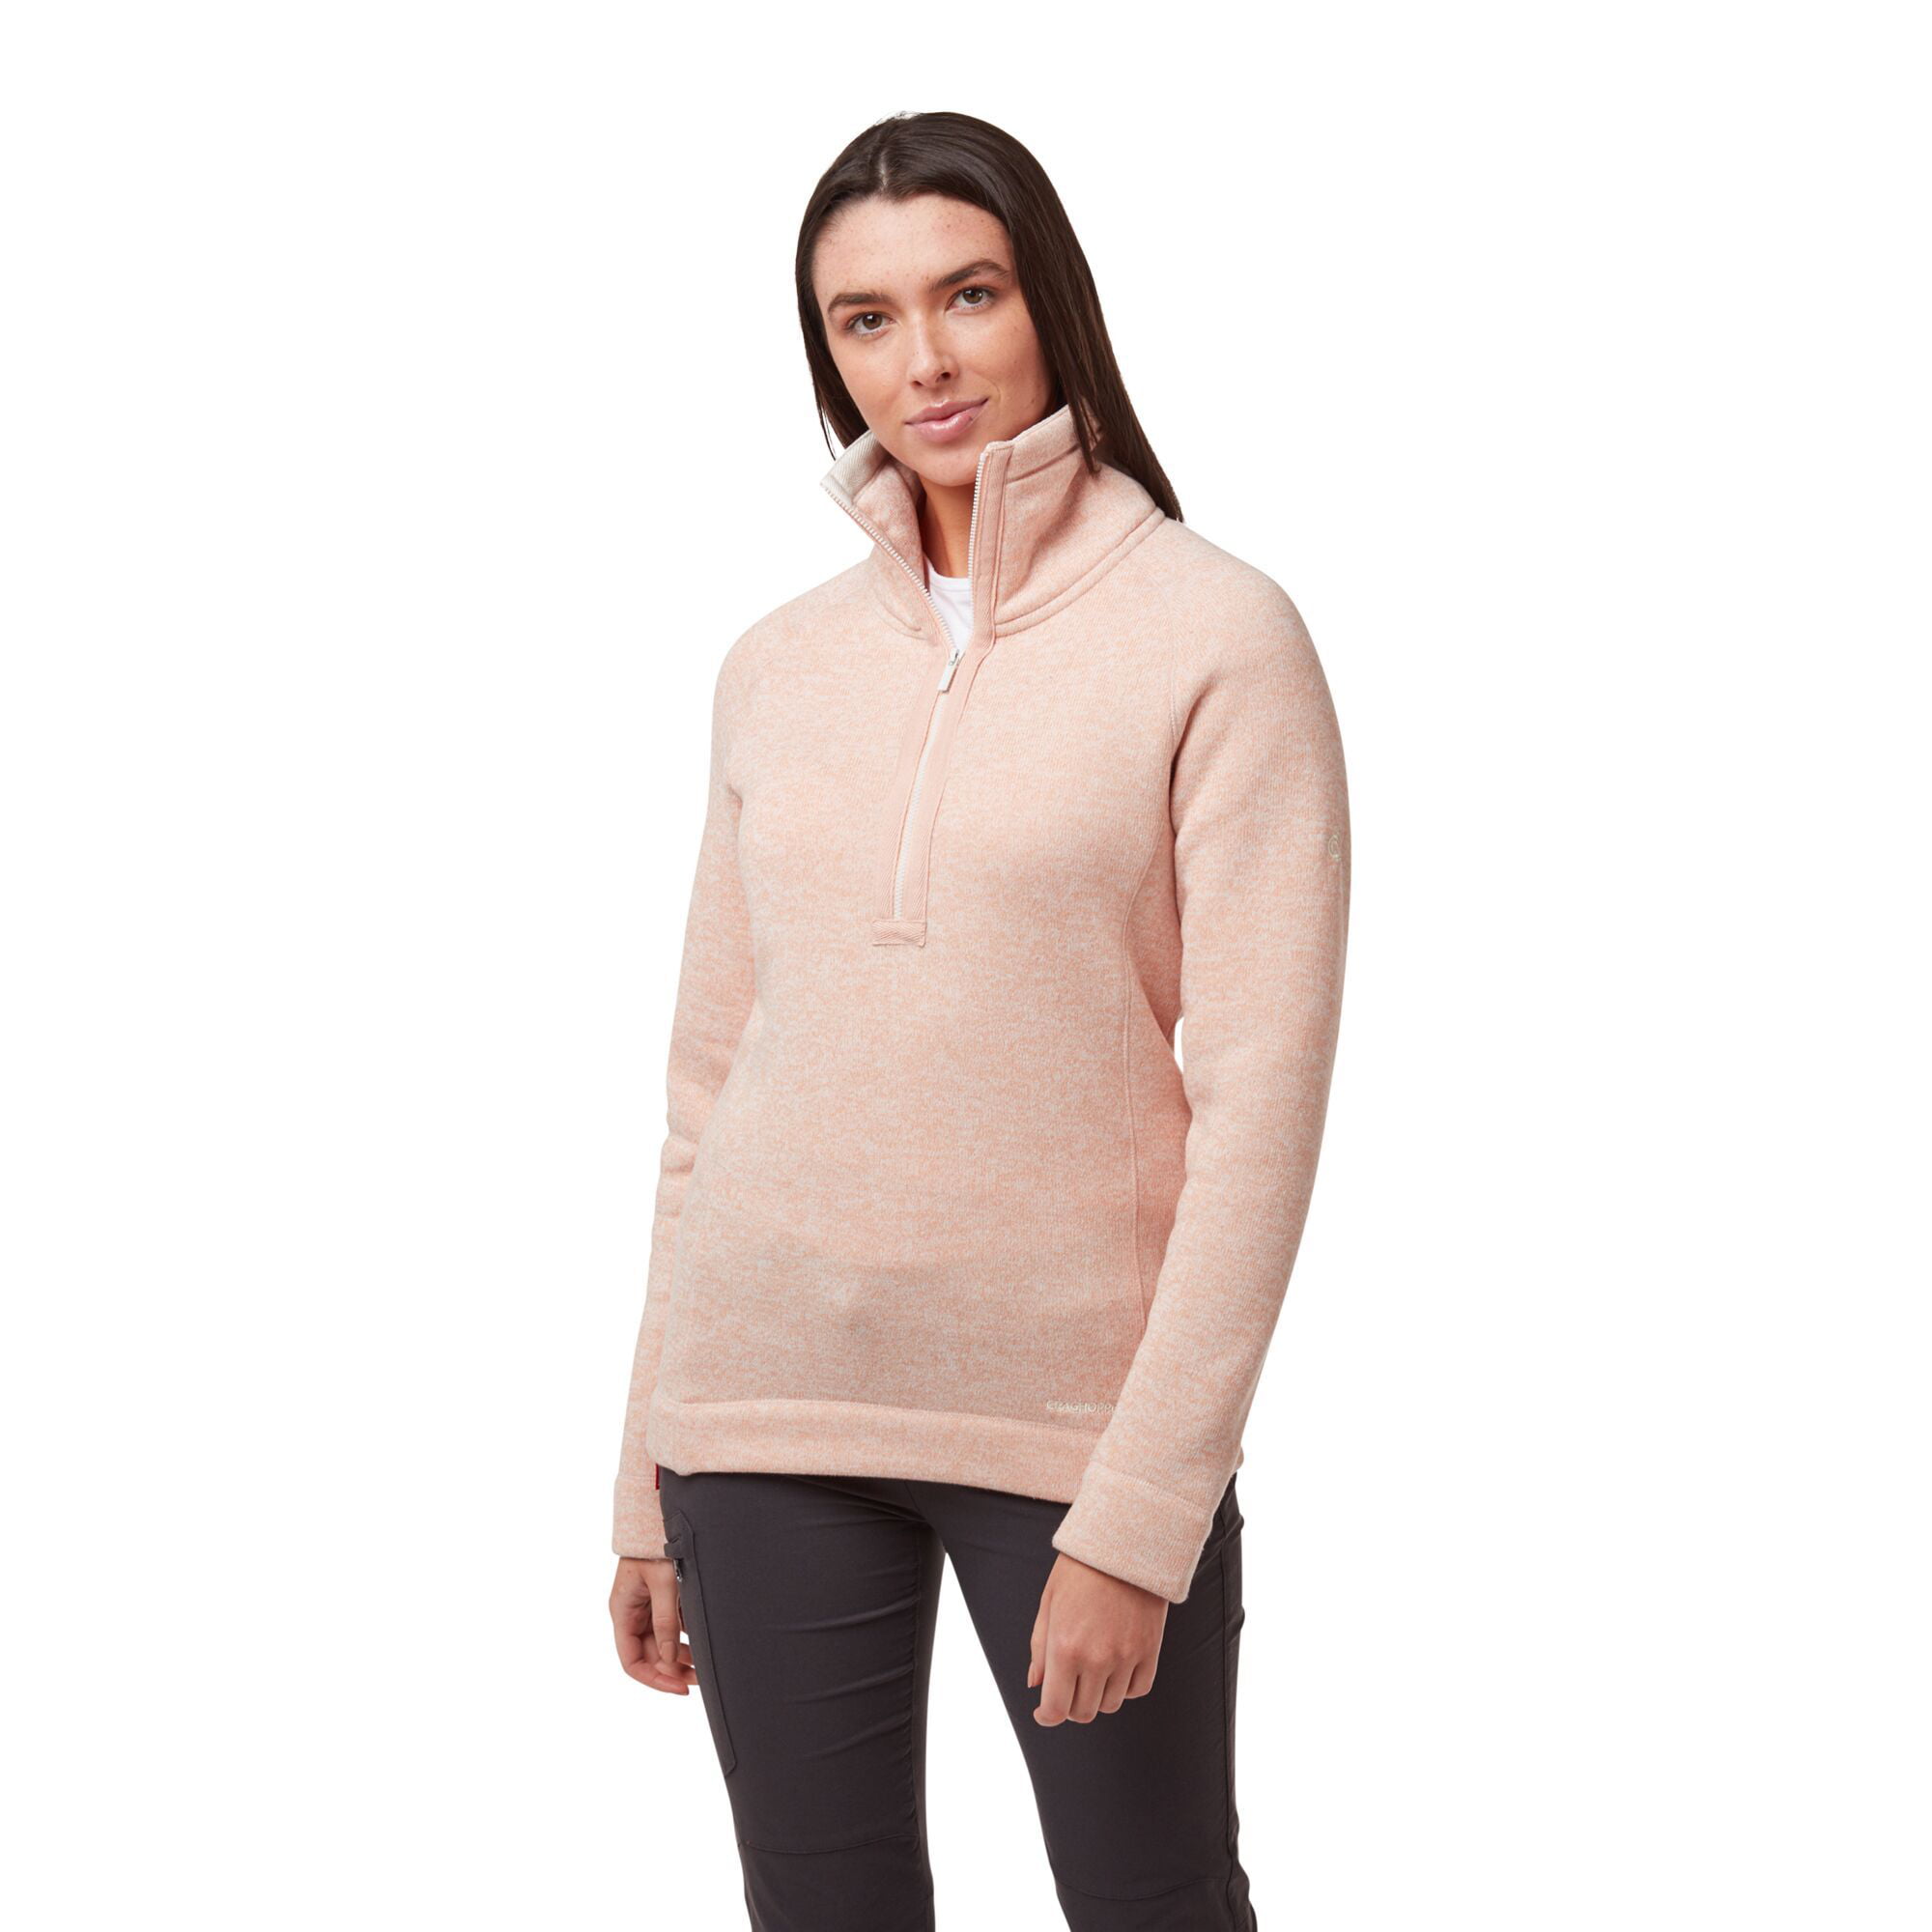 White Calvin Klein Synthetic Plush Half-zip Pullover Jacket in Blush Womens Clothing Jumpers and knitwear Zipped sweaters 